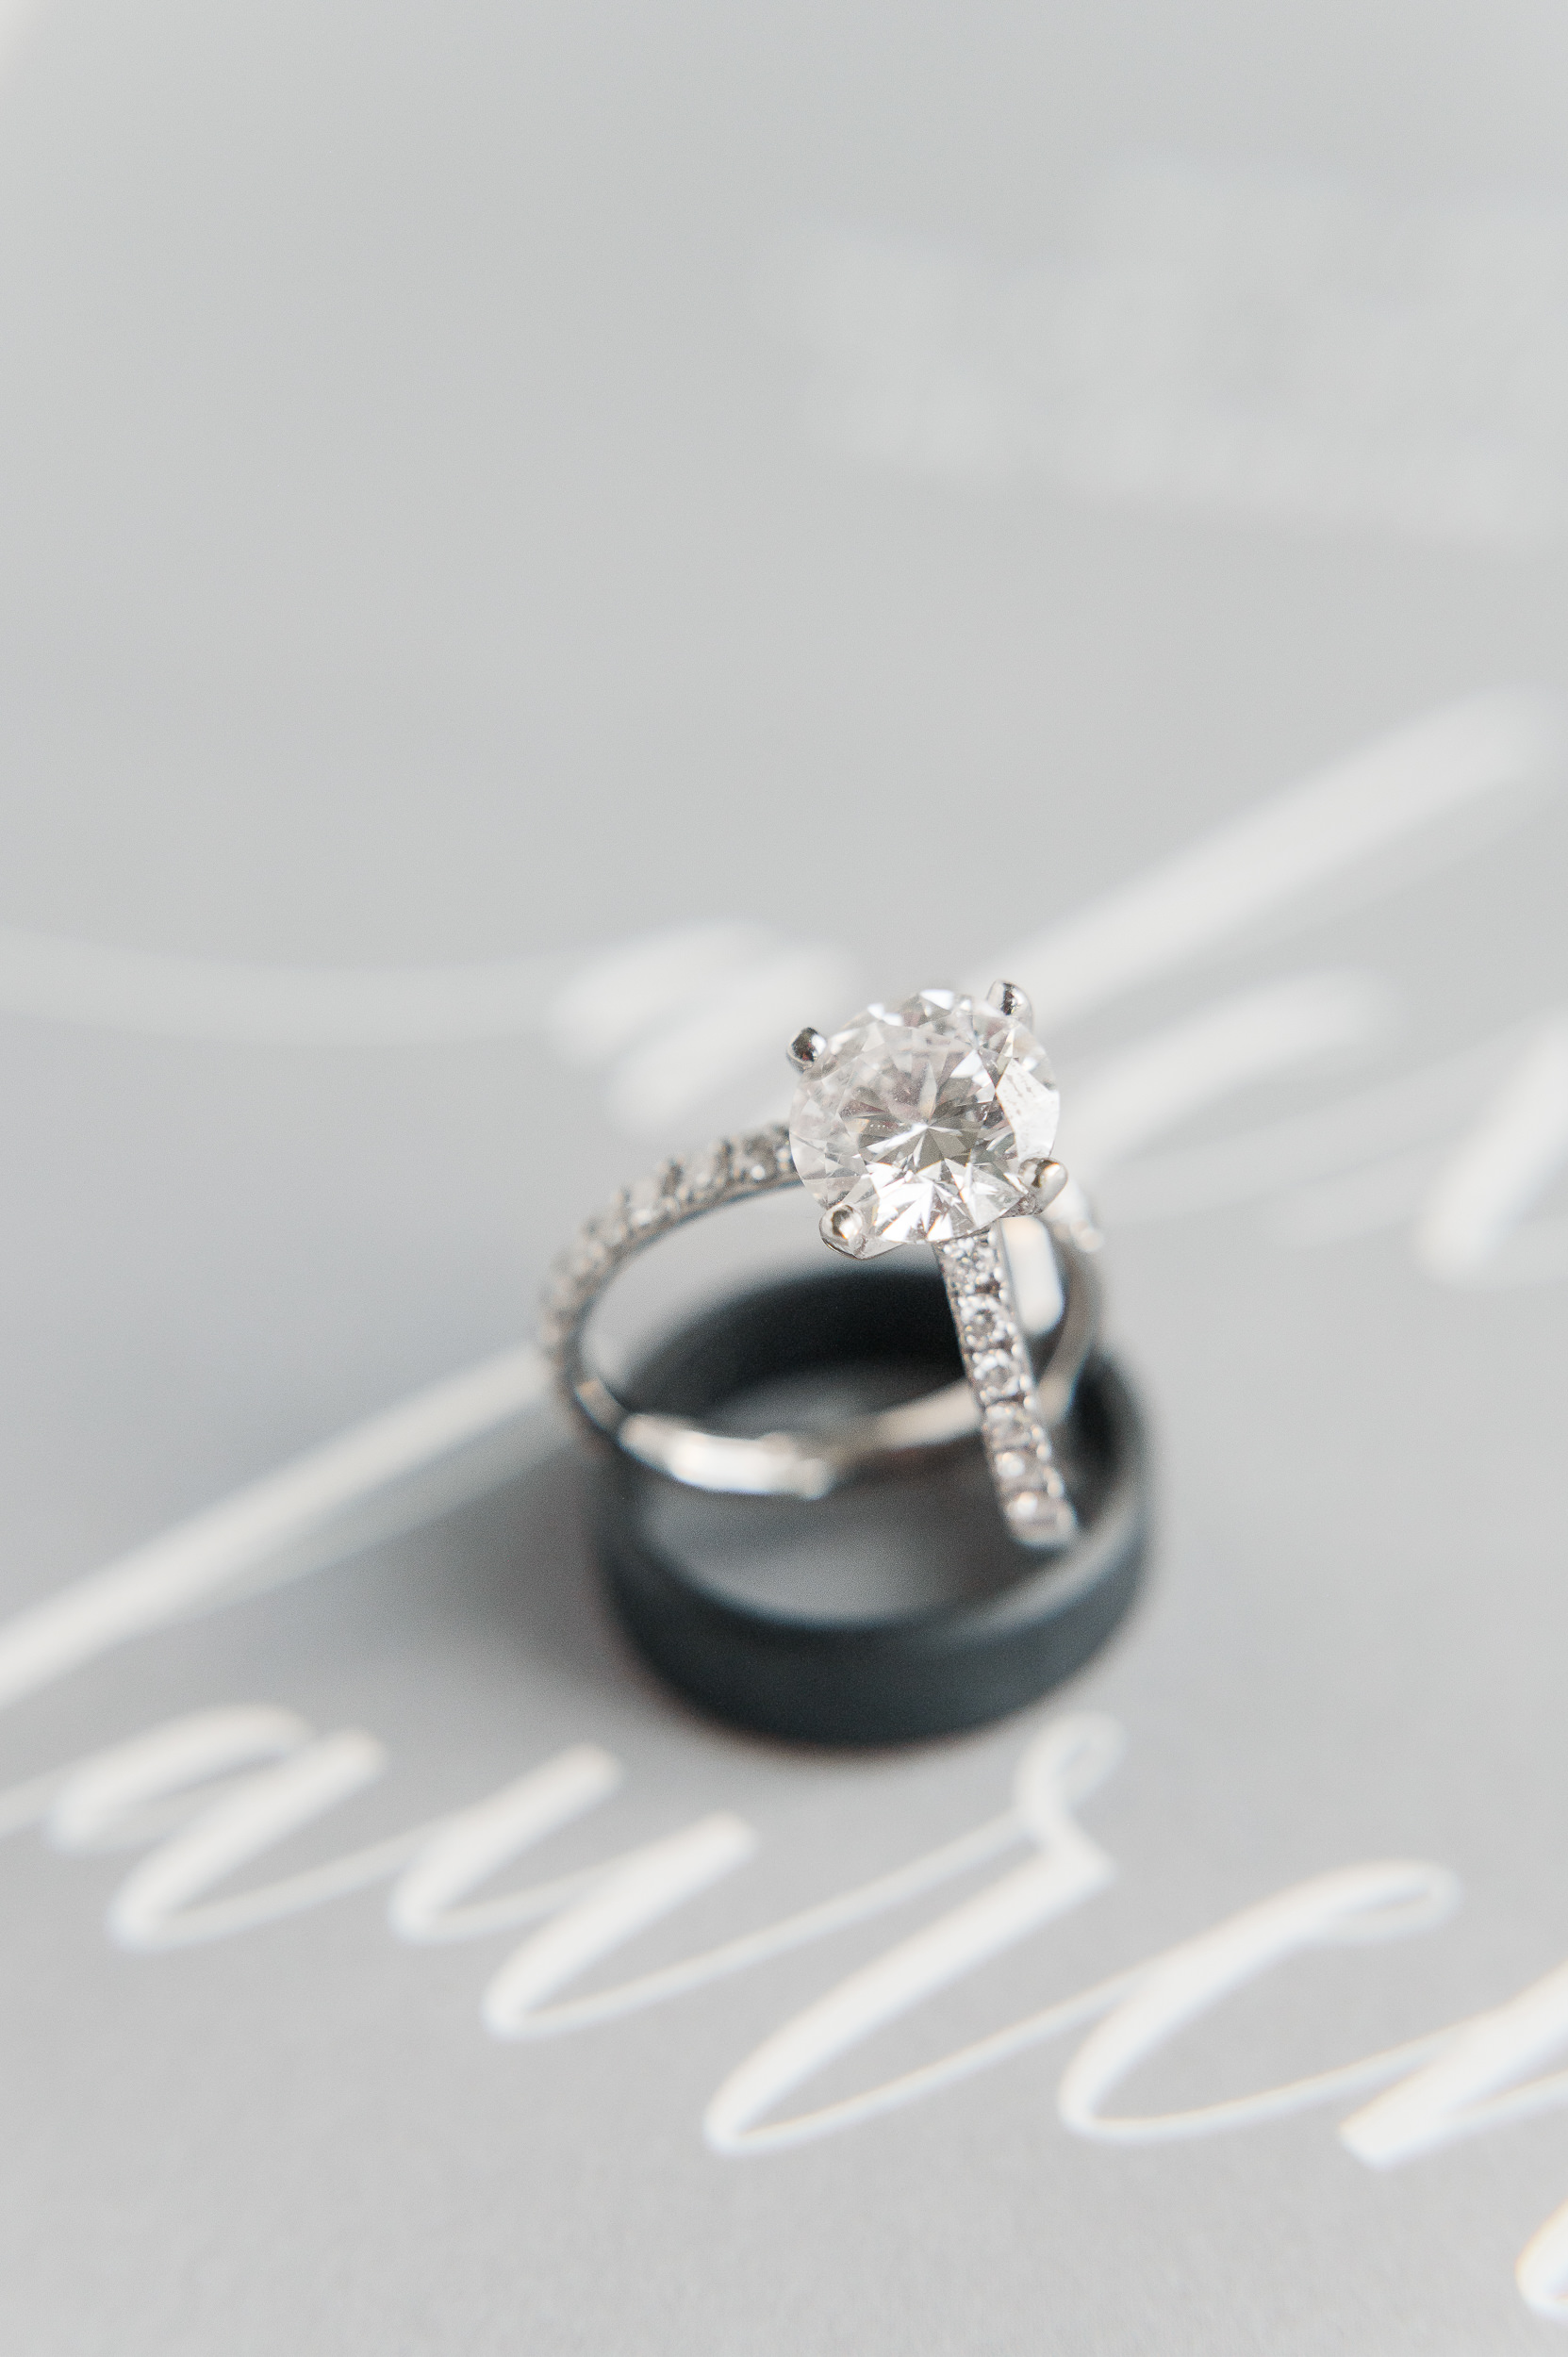 Close up photo of a diamond ring sitting on a wedding band.